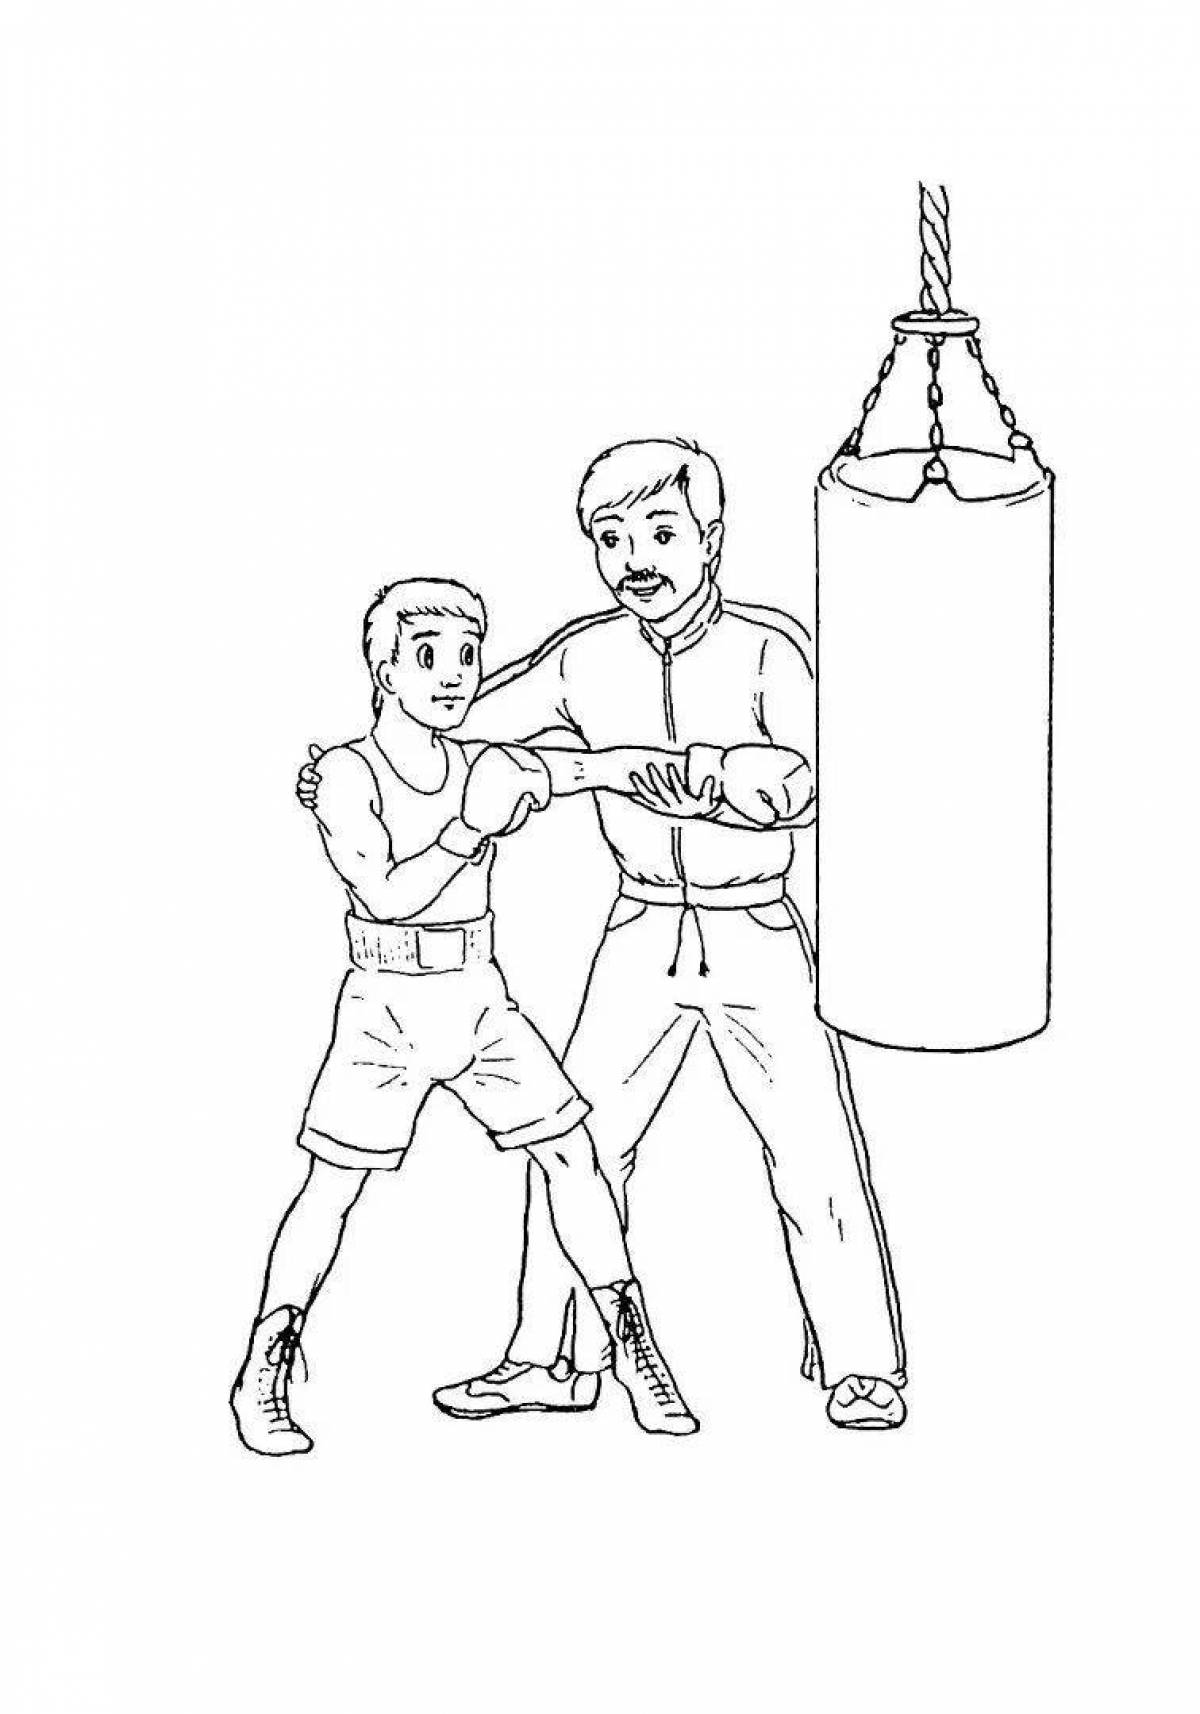 Animated boxing coloring page for kids